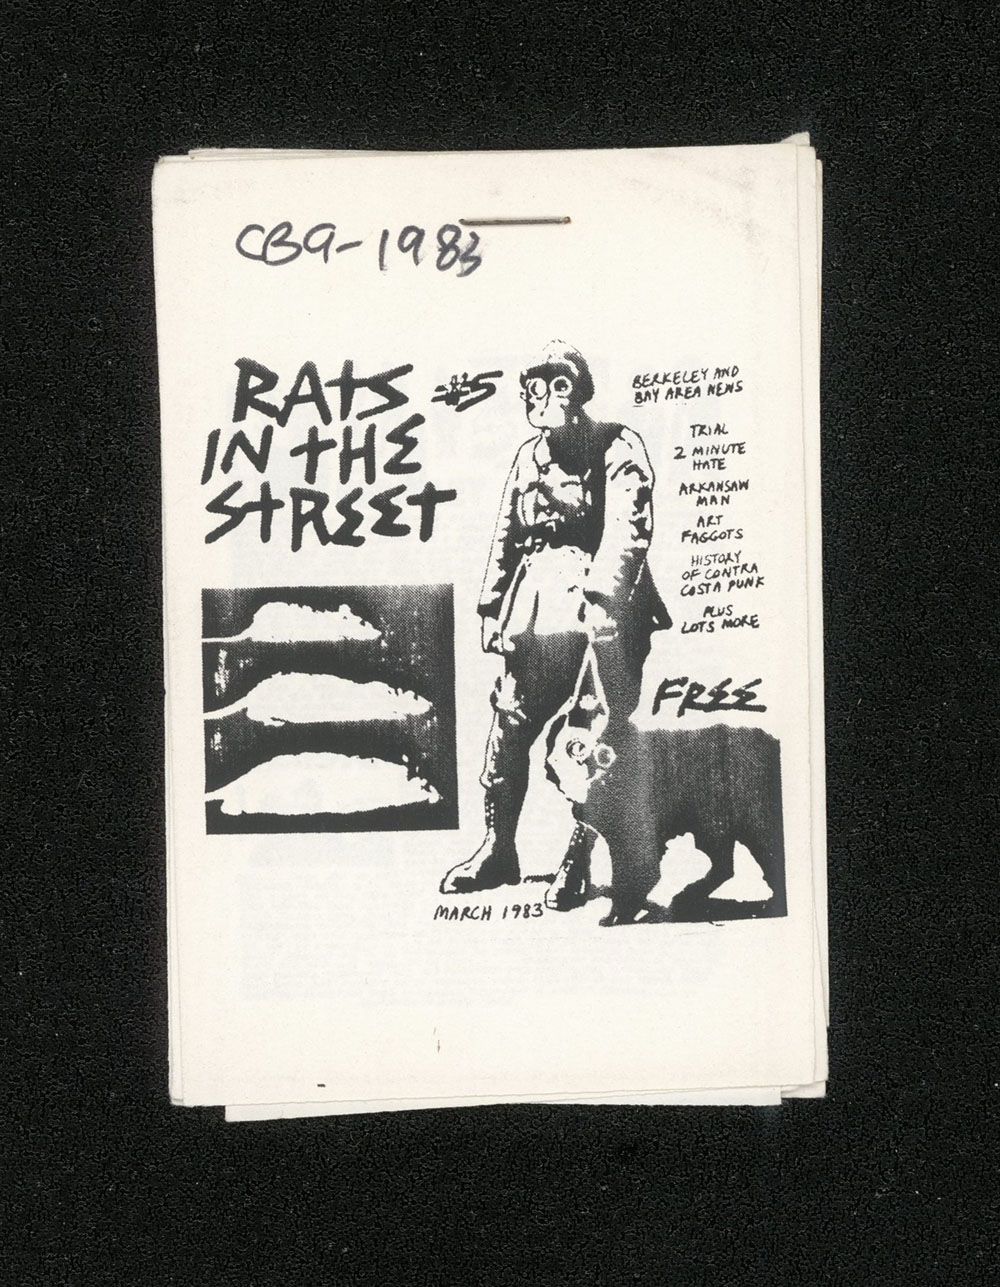 COMETBUS #09 a/k/a RATS IN THE STREET #5